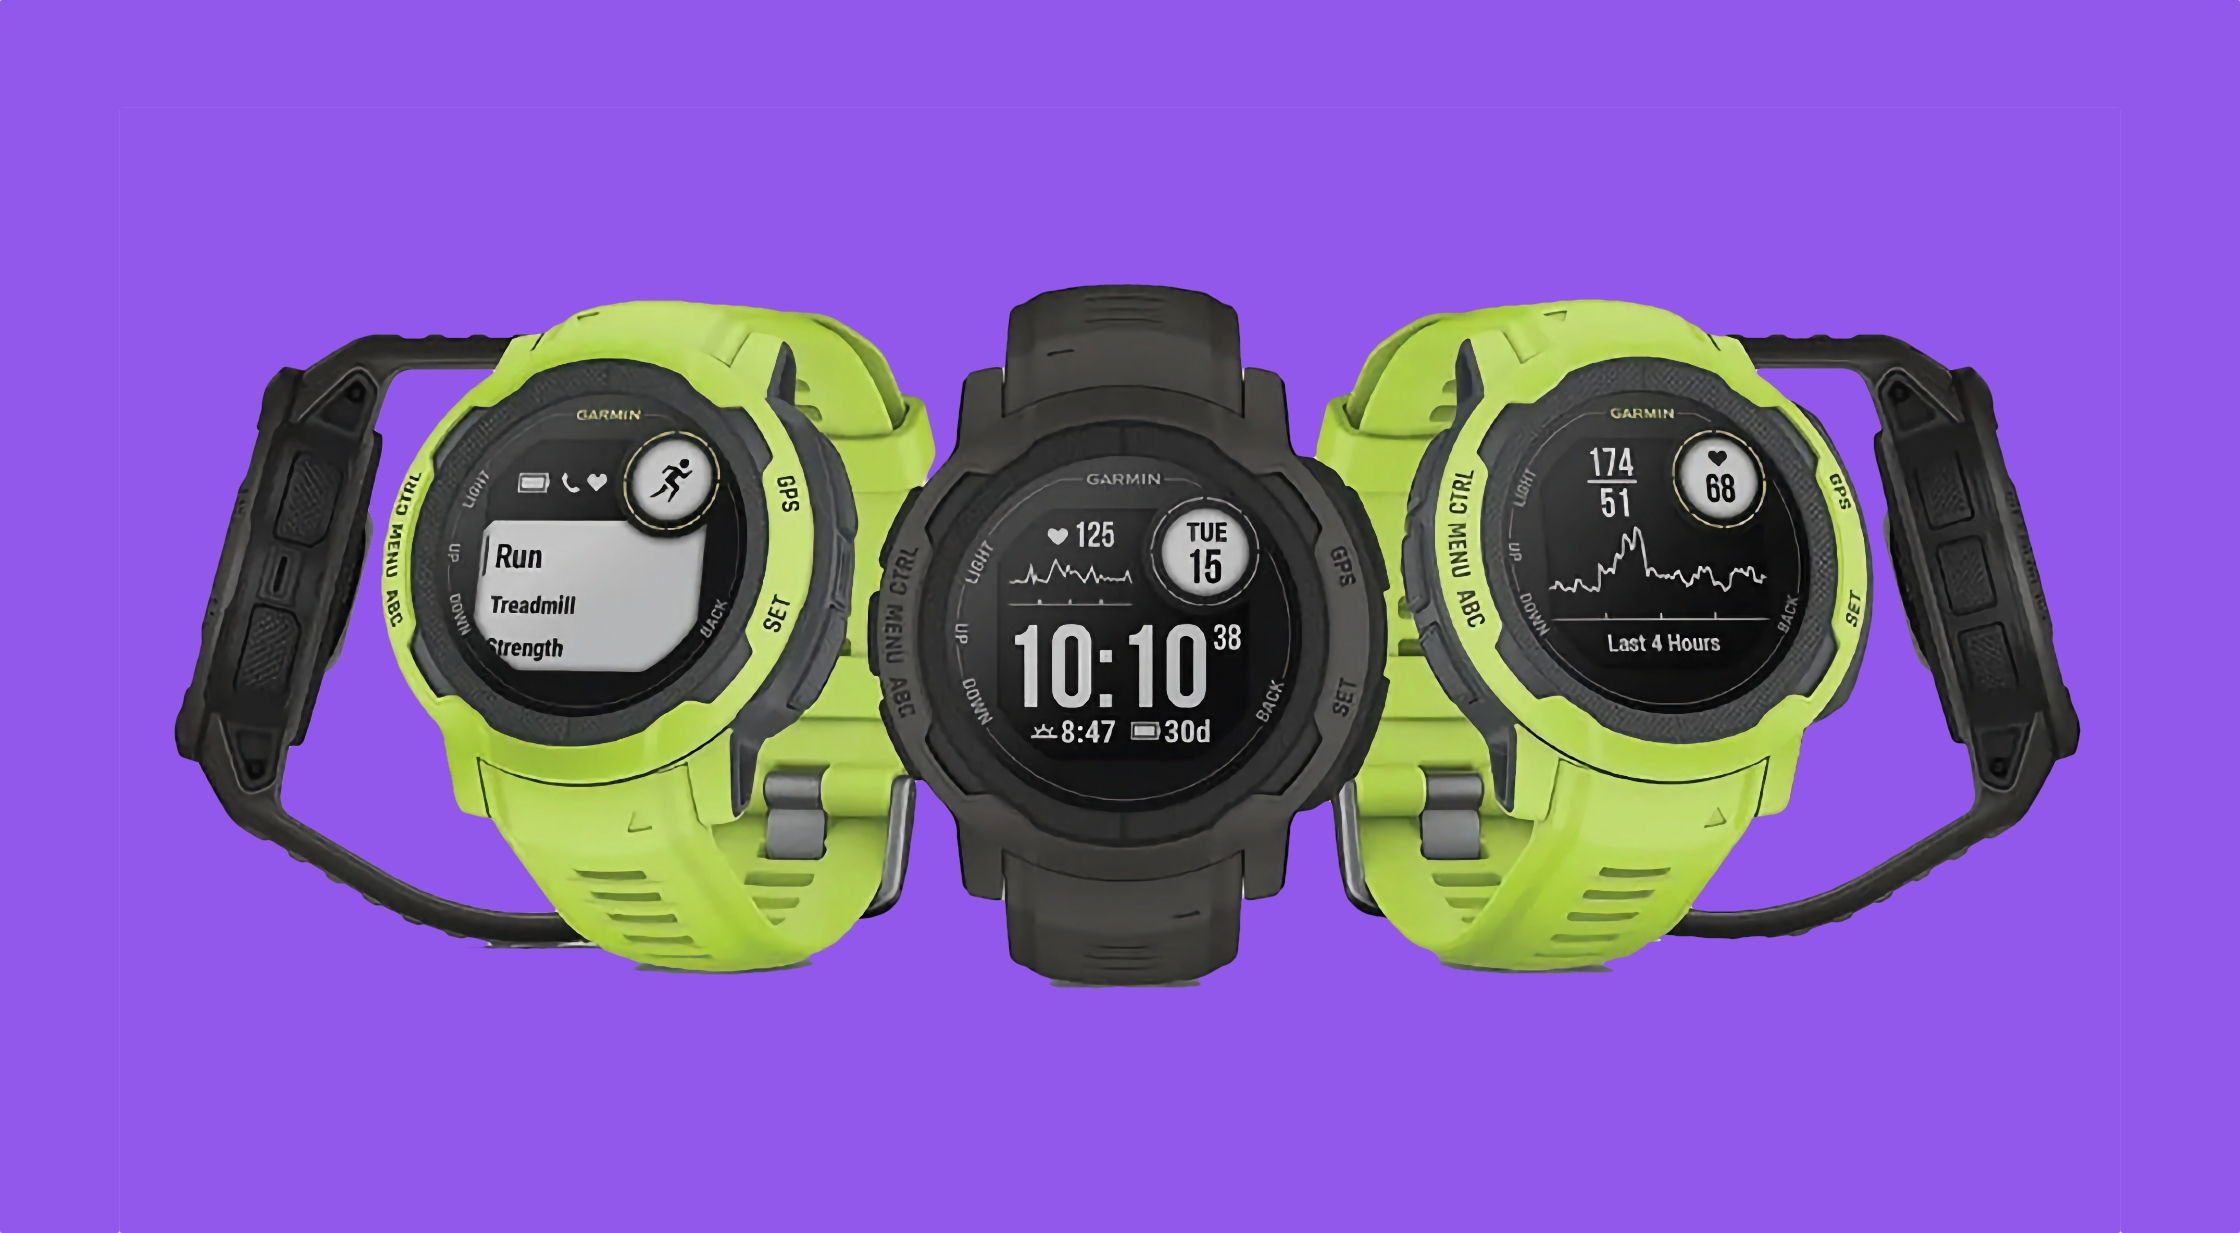 Garmin sports smartwatch on sale on Amazon with discounts up to $192